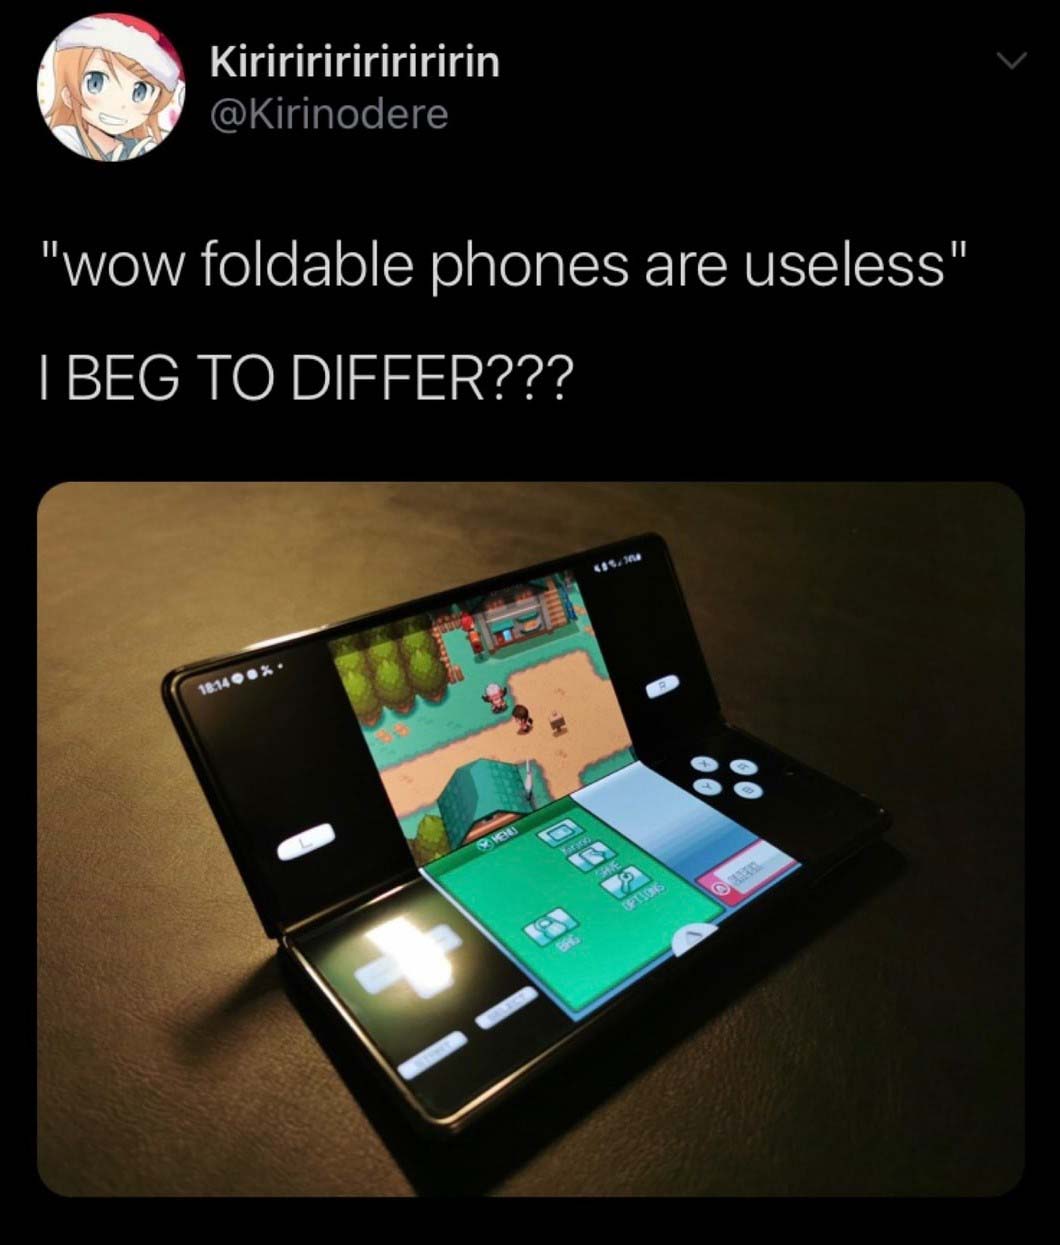 Foldable phones are not useless